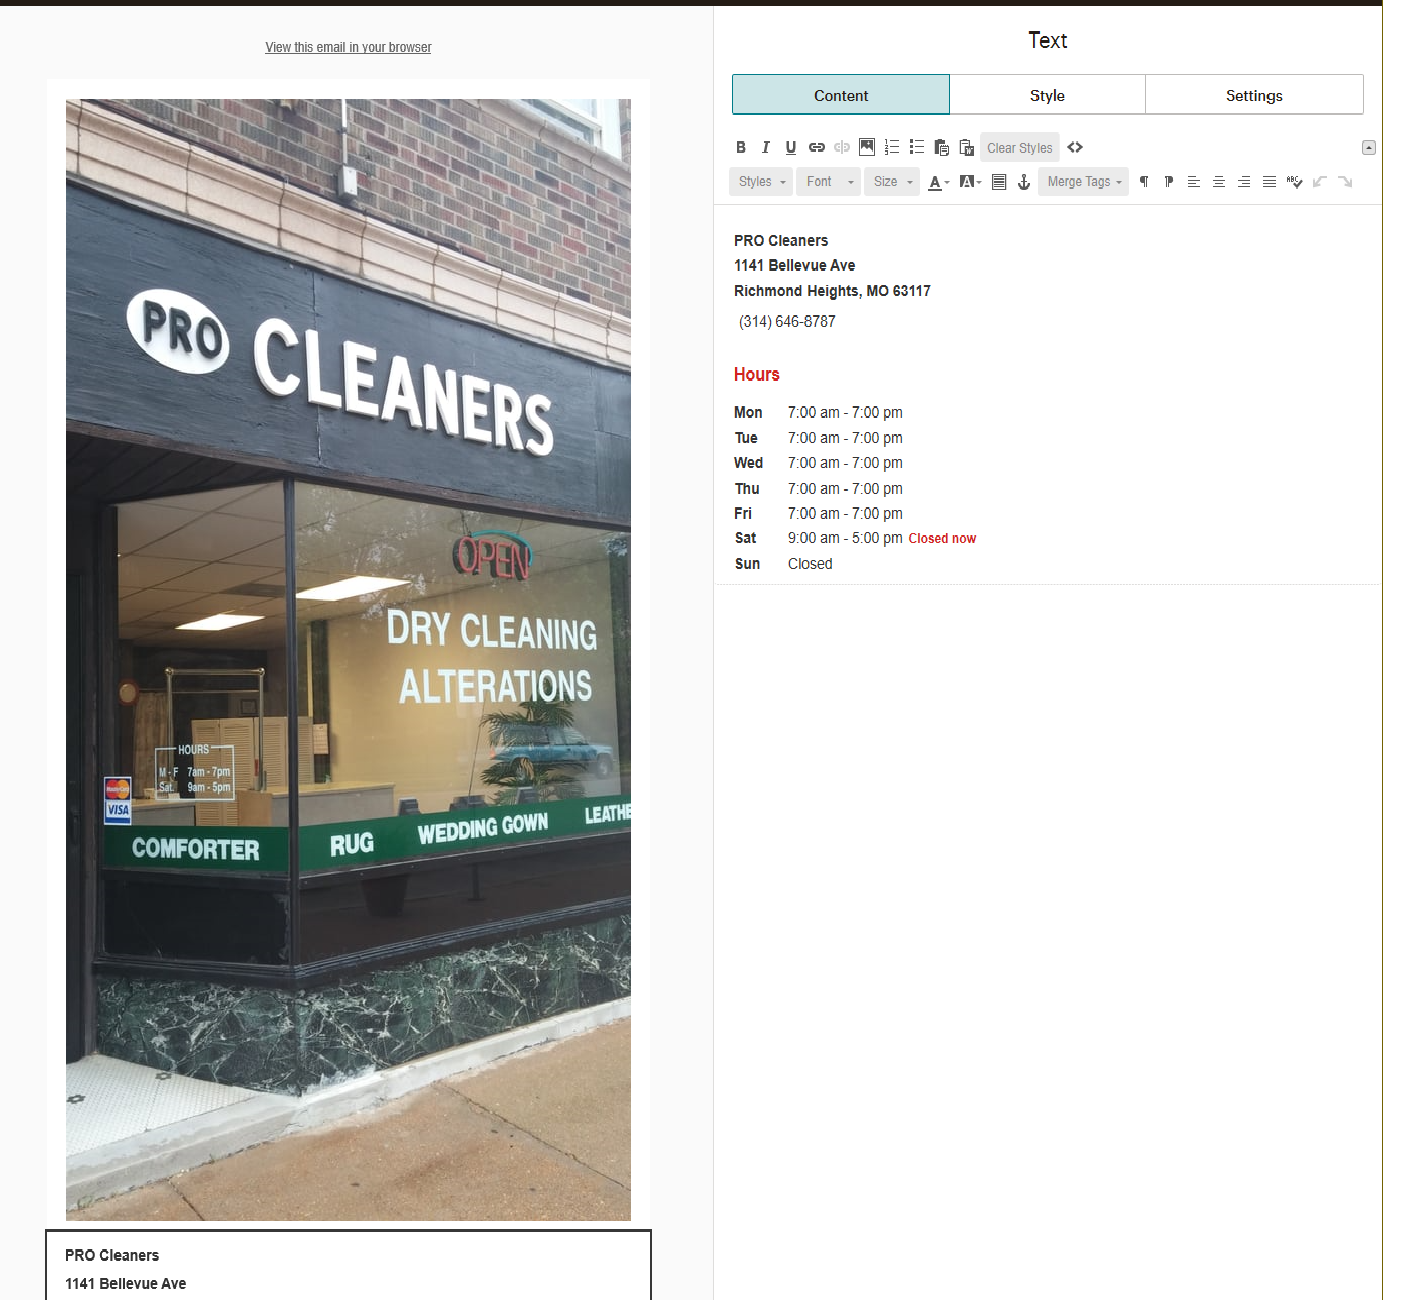 Dry Cleaning Software